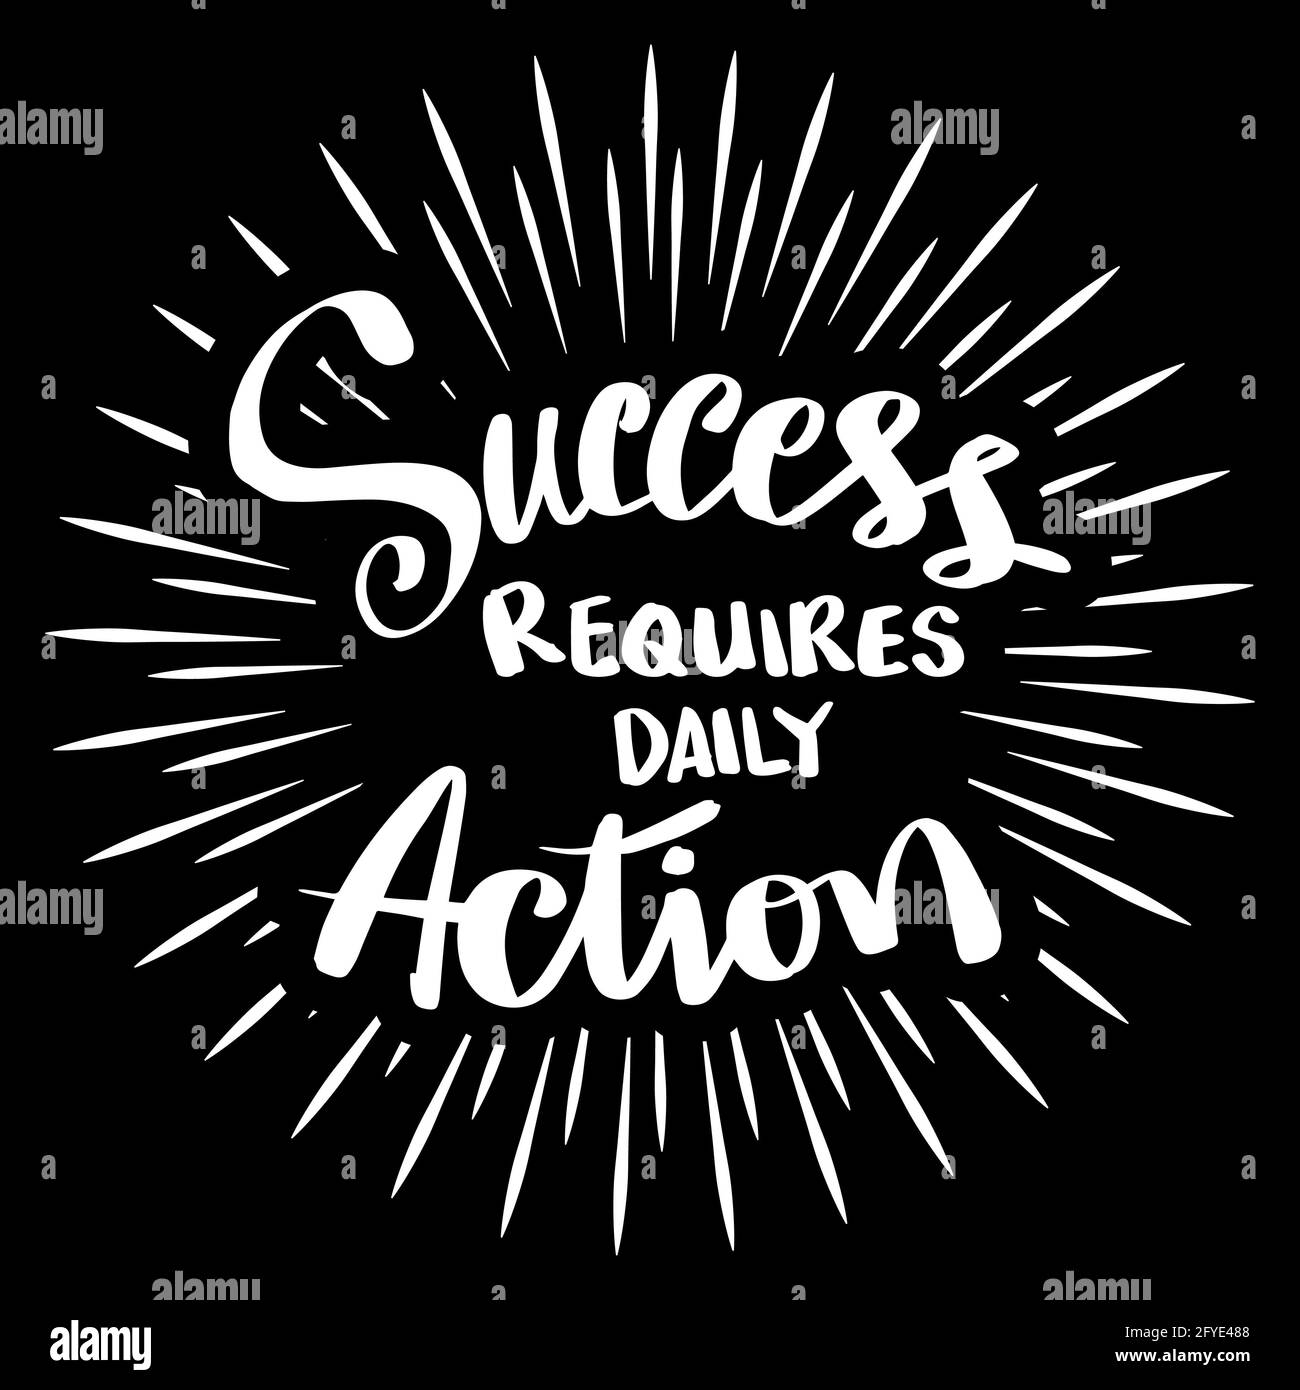 Success requires only action. Hand drawn motivational quote Stock Photo